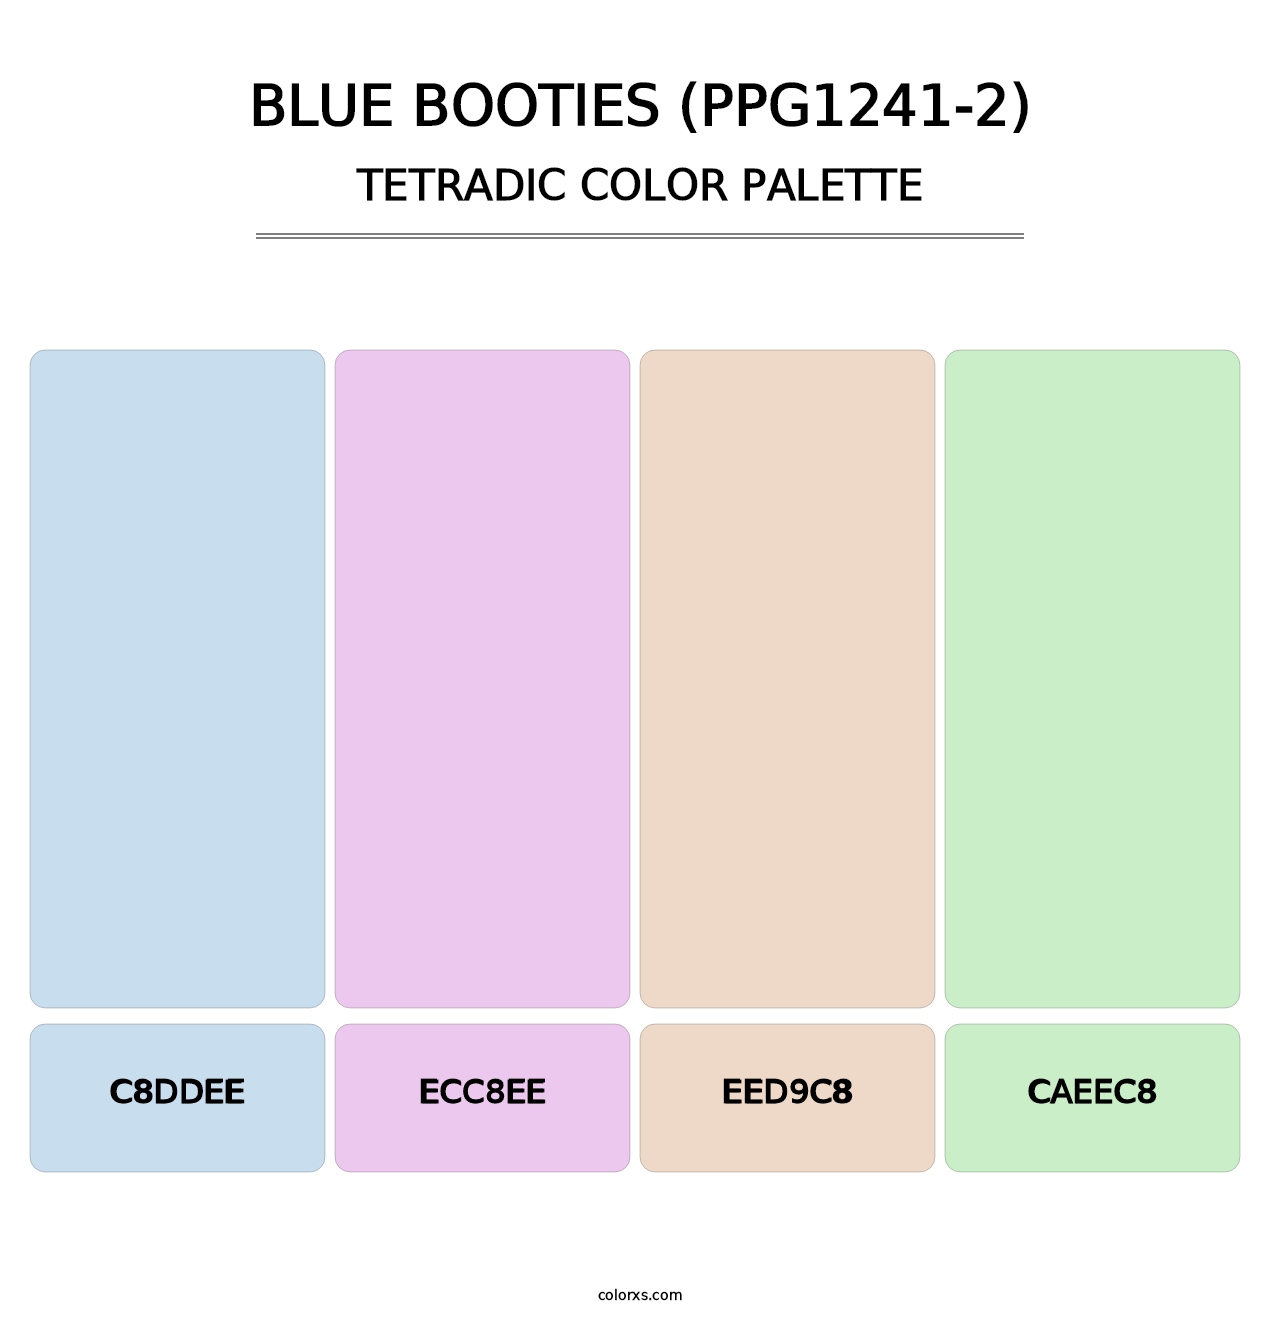 Blue Booties (PPG1241-2) - Tetradic Color Palette